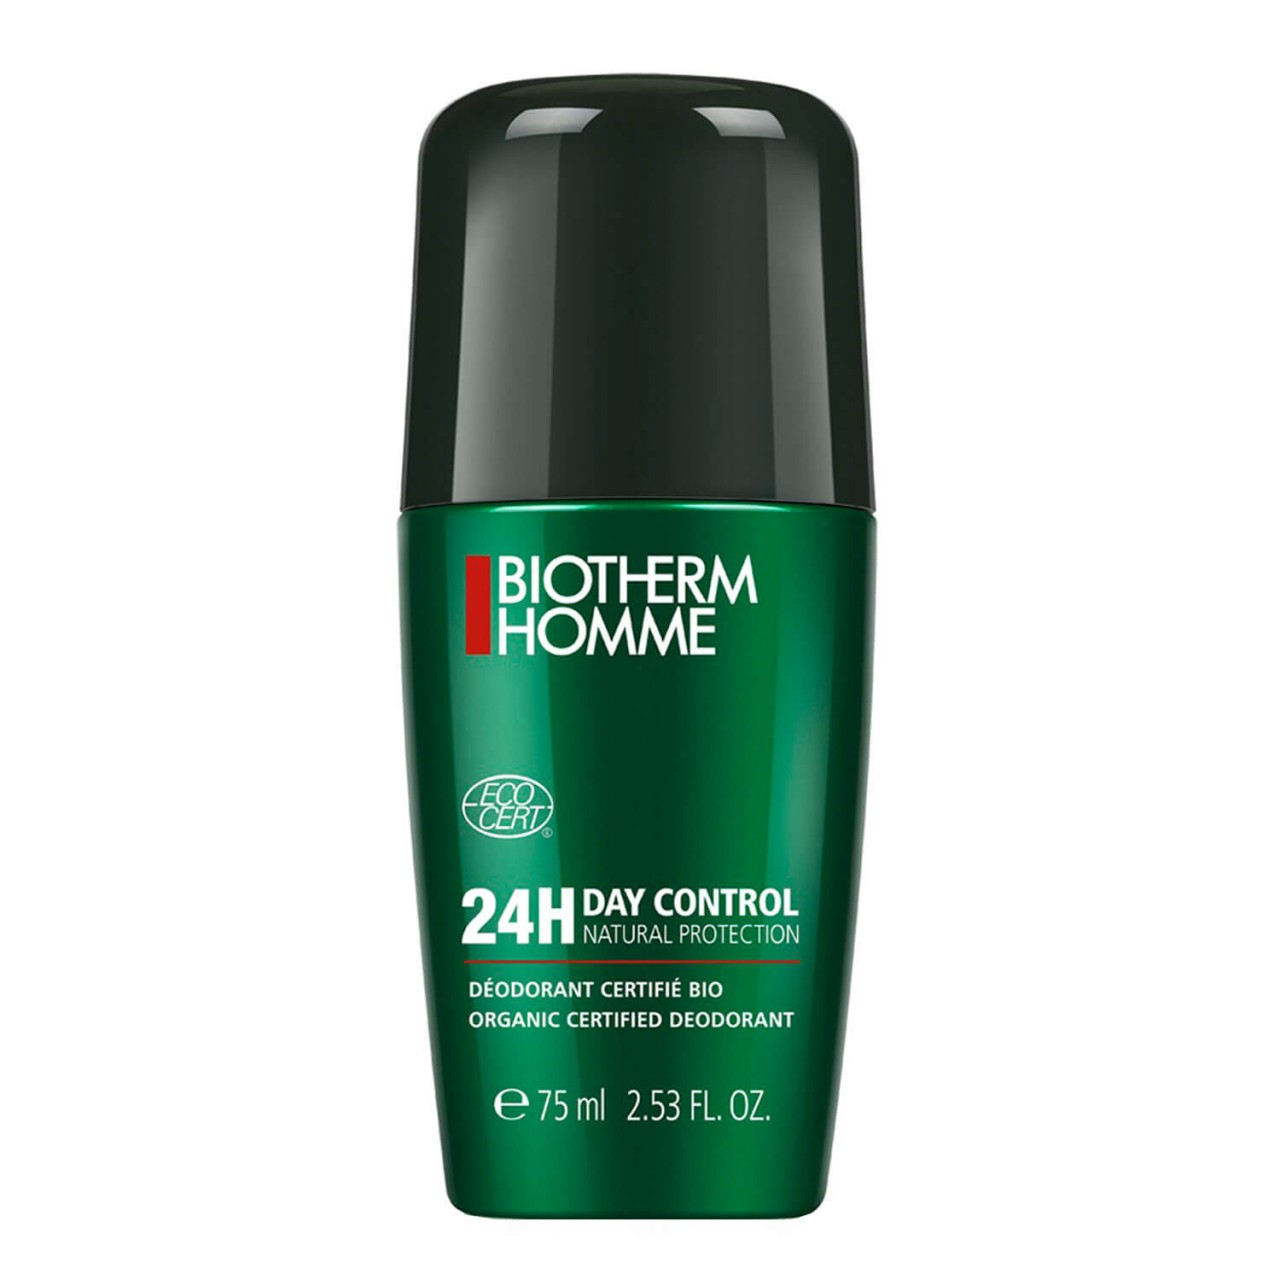 Biotherm Homme - Day Control 24H Natural Protection von BIOTHERM